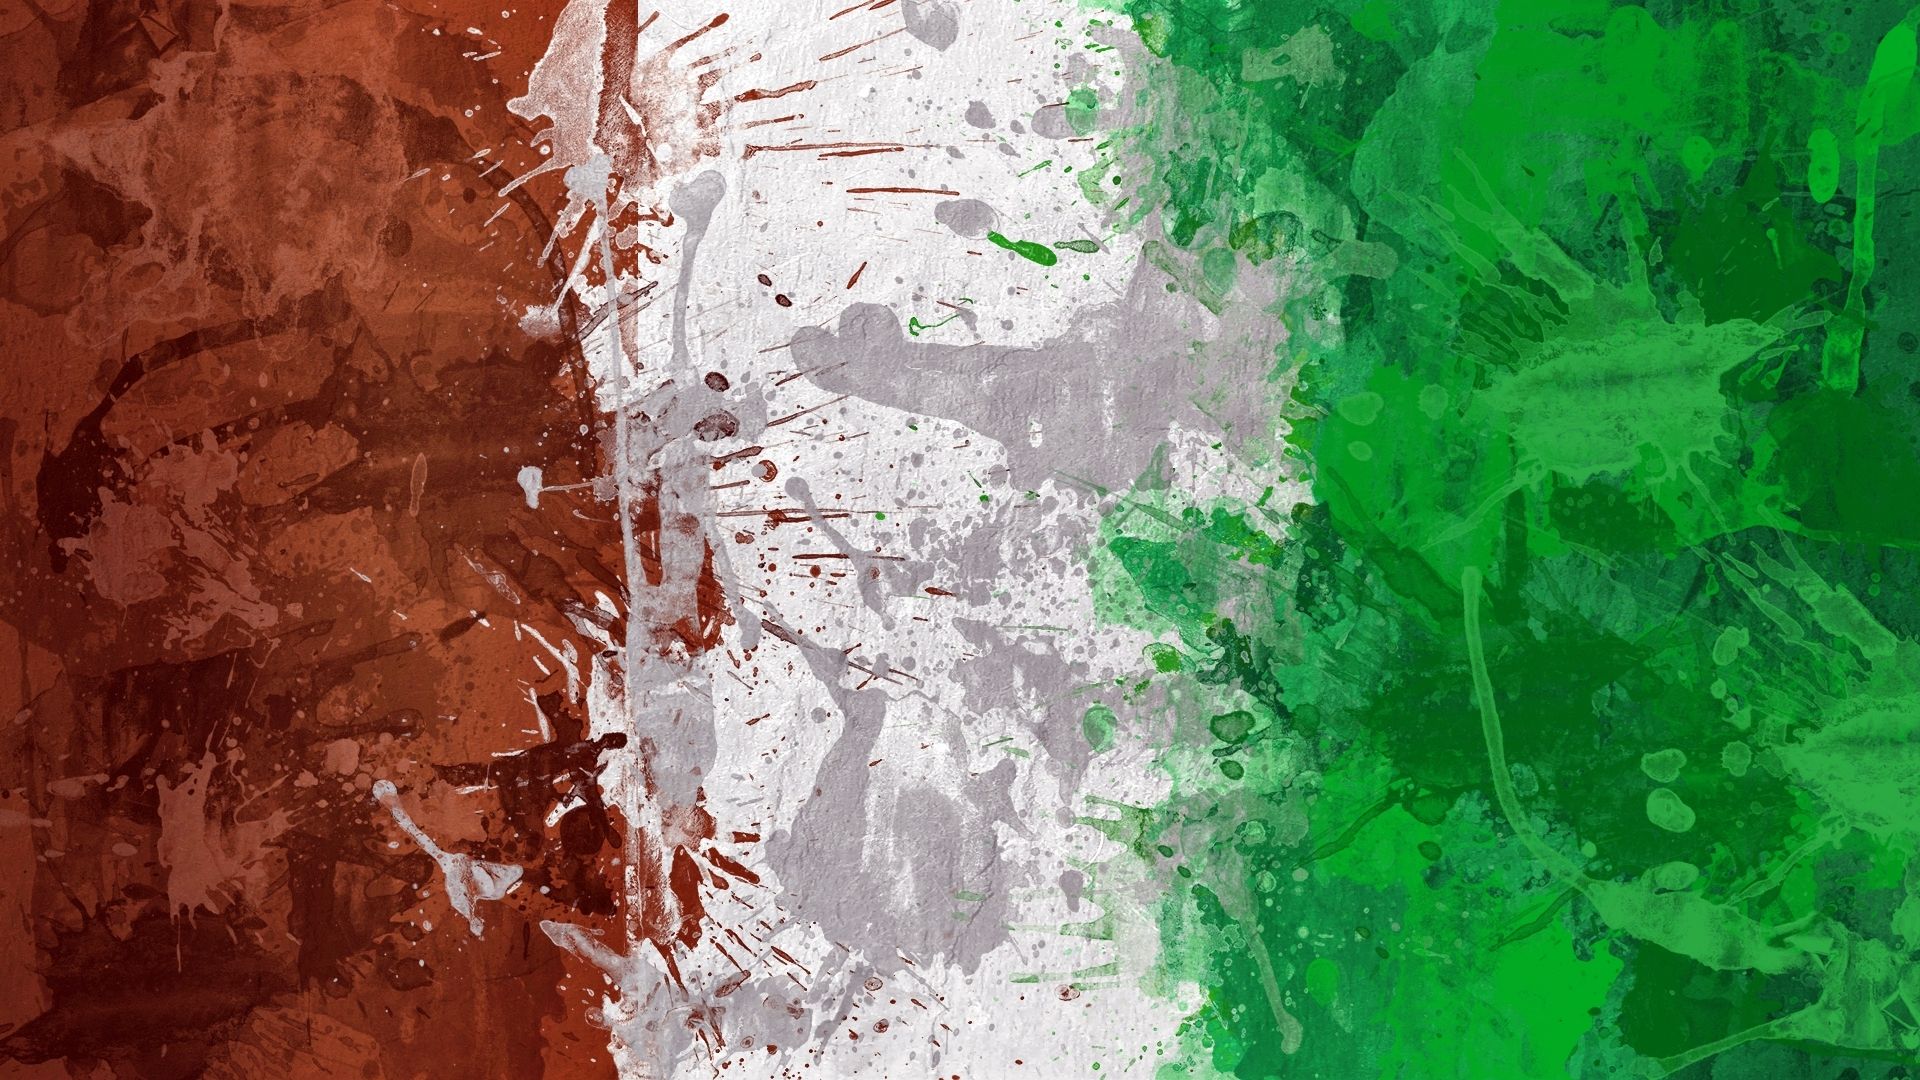 Italian Abstract Flag Wallpaper Hd (View 11 of 15)